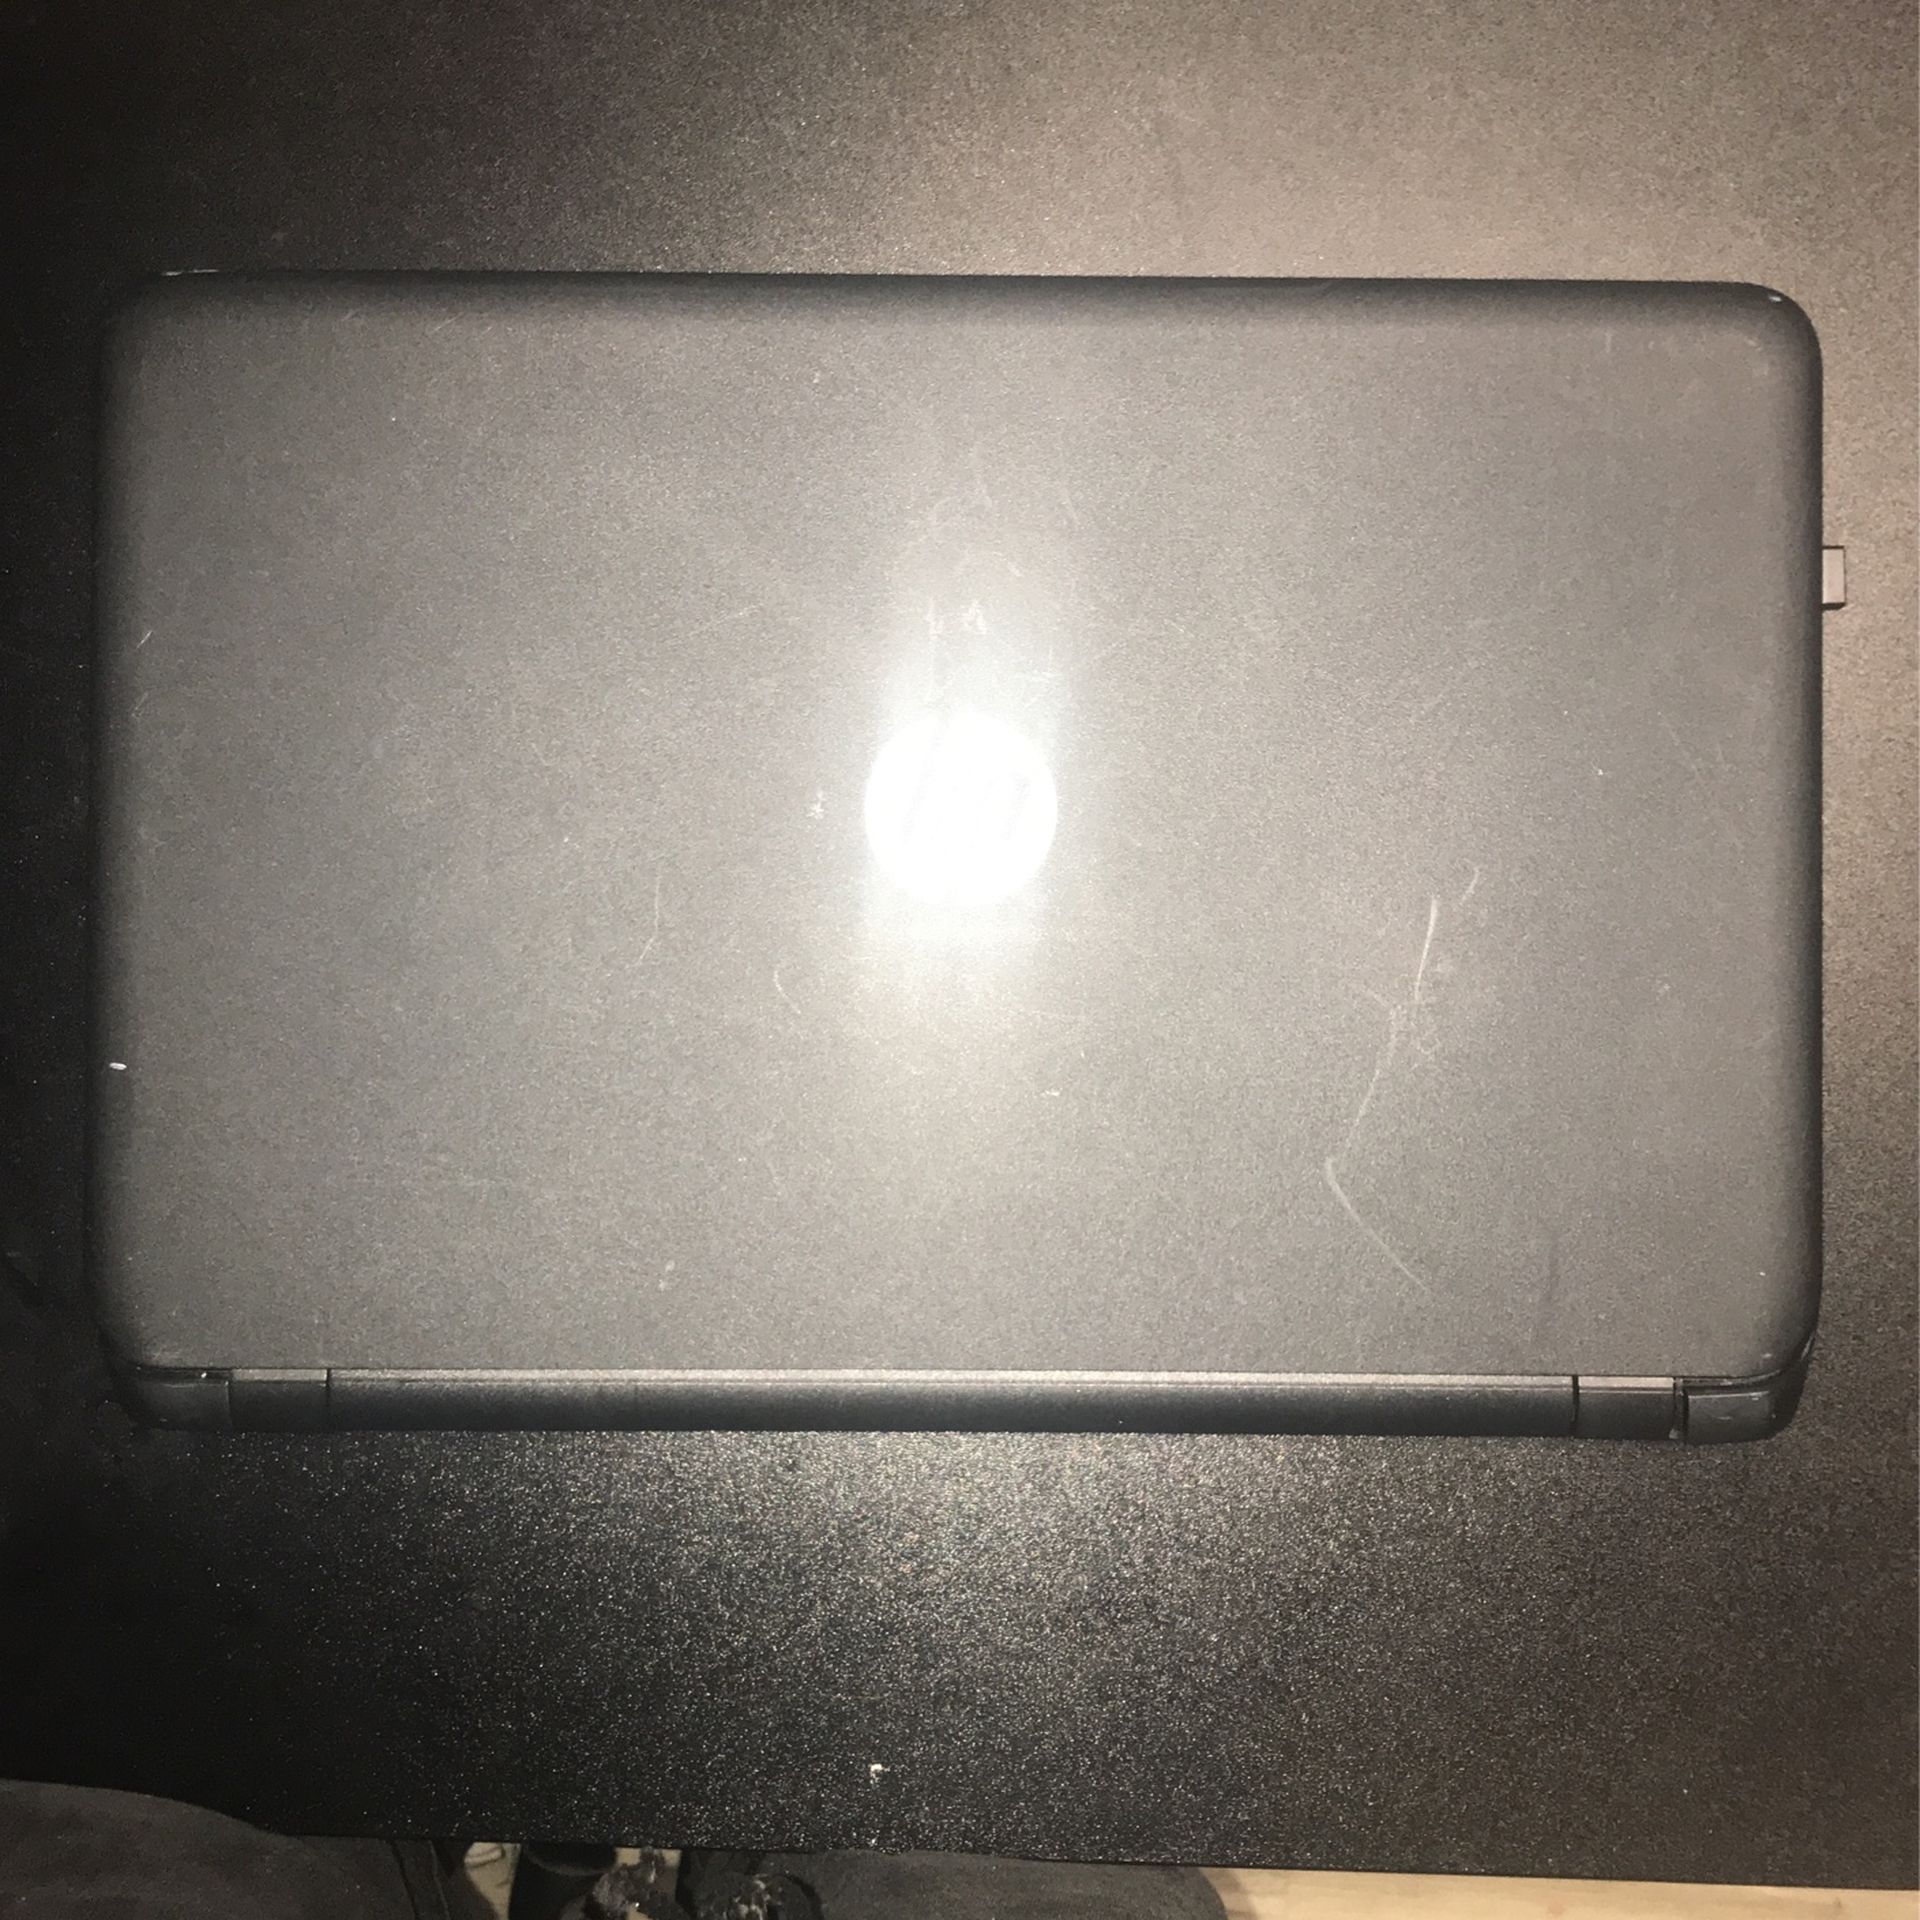 HP Laptop [Great Condition]